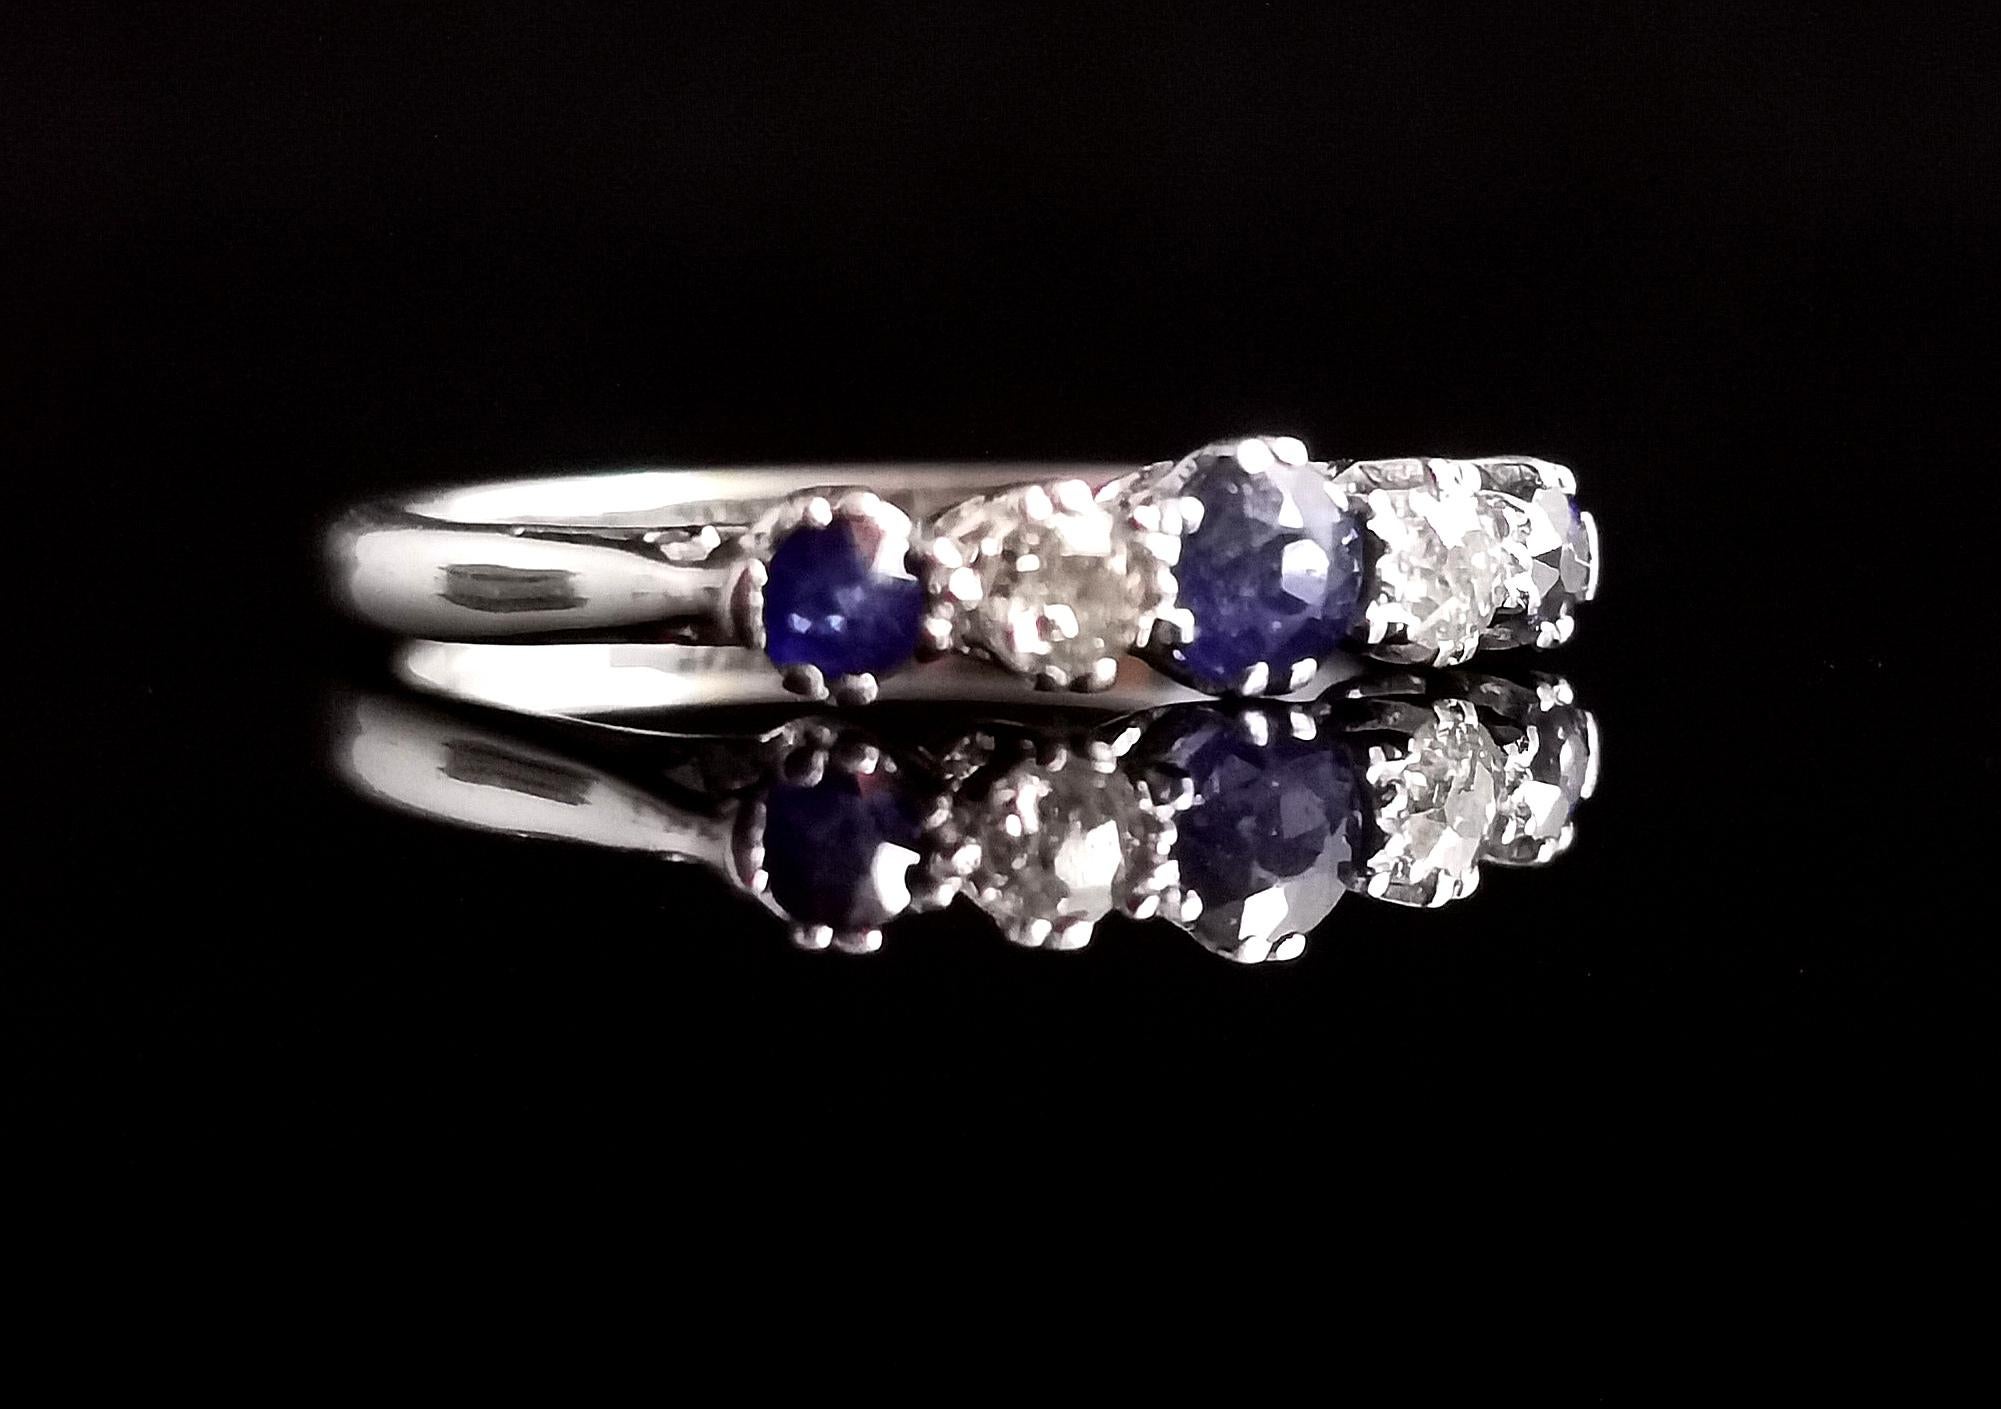 A stunning vintage, mid century, c1940s, Sapphire and Diamond half hoop ring.

The ring has a lovely D profile, high polish 18 karat white gold band with a platinum half hoop setting.

The setting features a beautiful rich blue central round cut